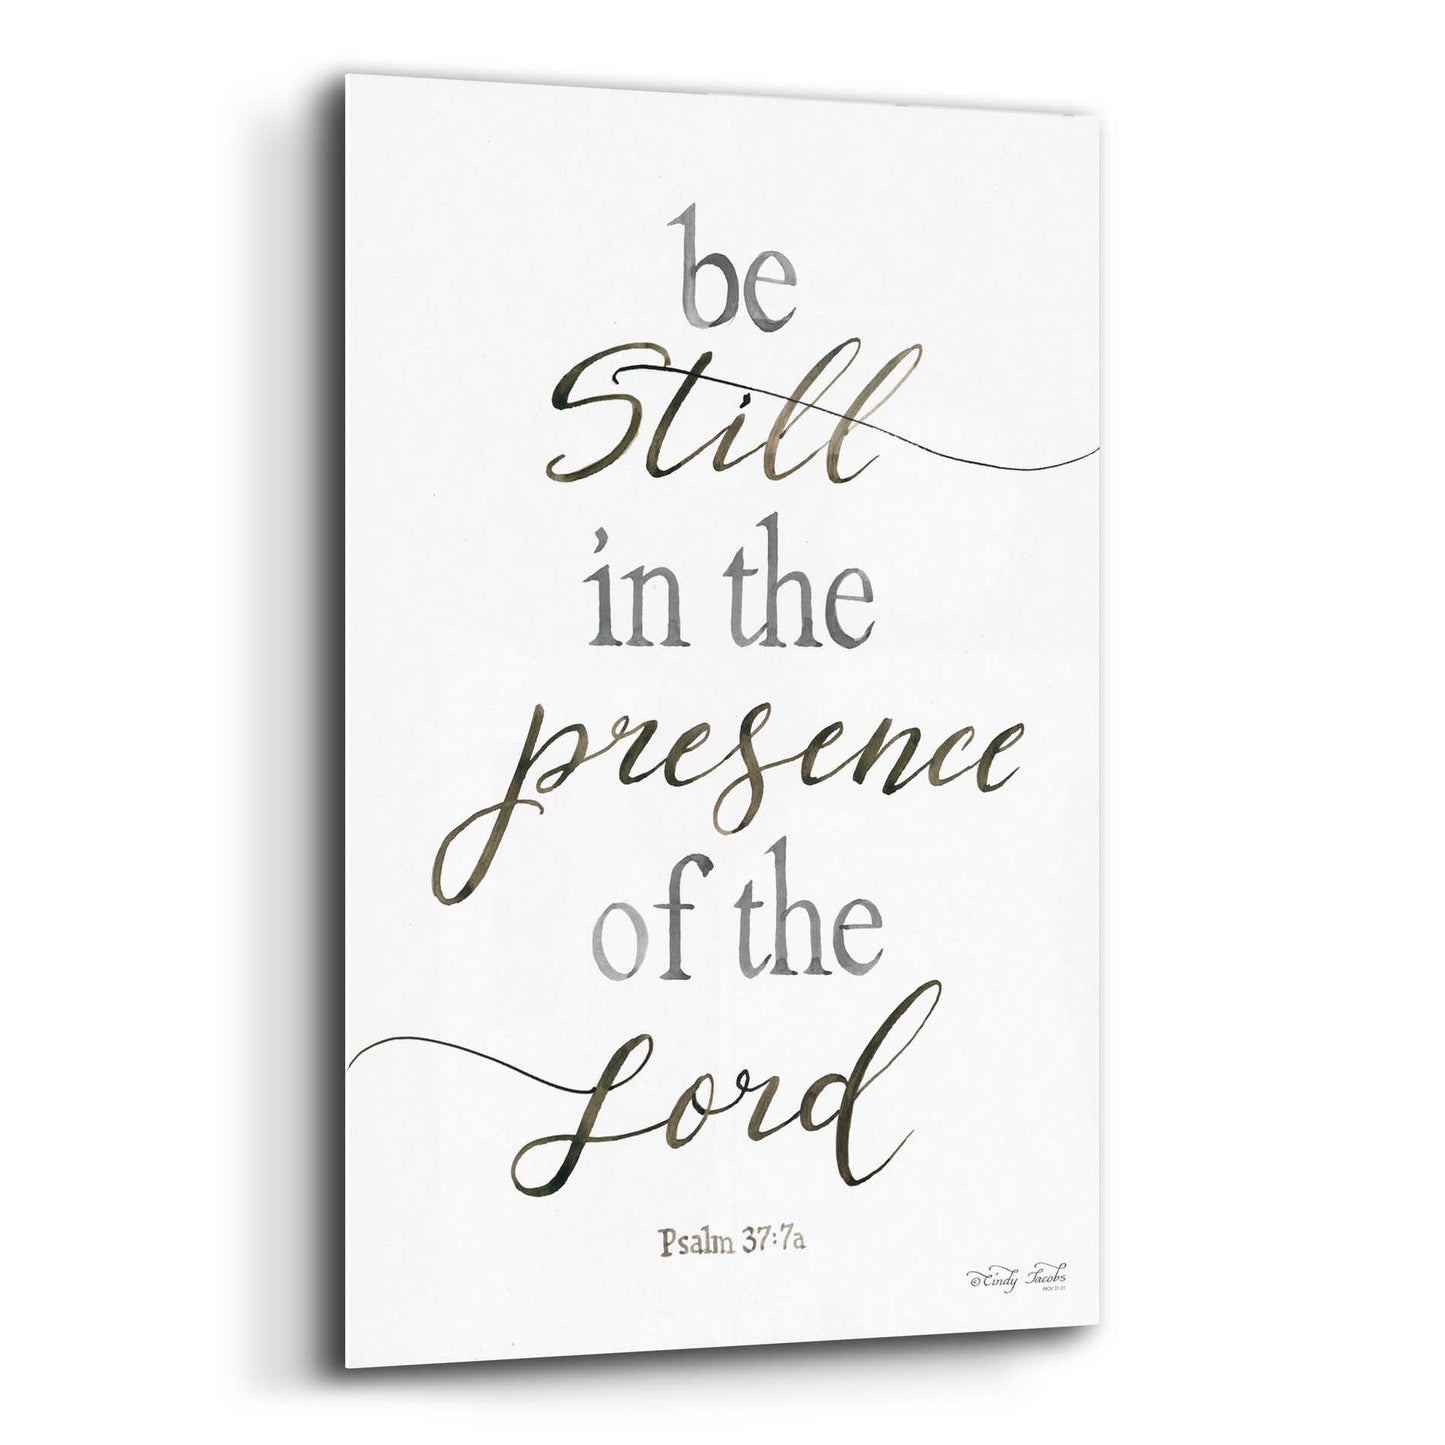 Epic Art 'Be Still in the Presence of the Lord' by Cindy Jacobs, Acrylic Glass Wall Art,16x24